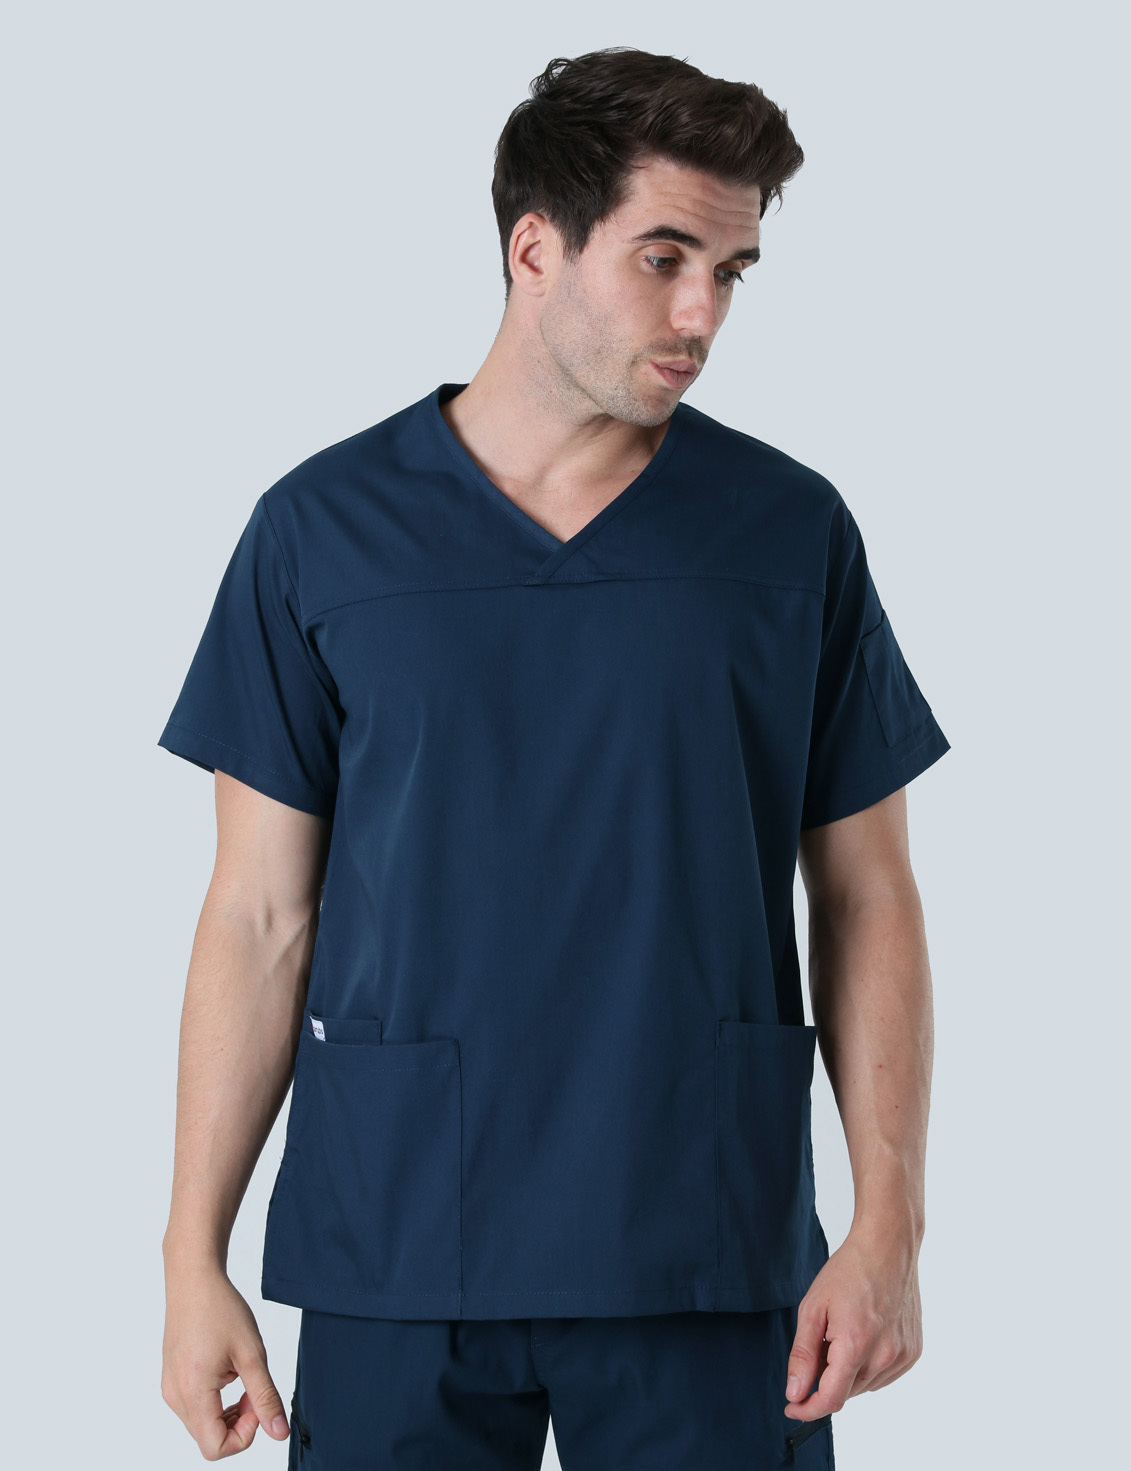 Men's Fit Solid Scrub Top - Navy - 2X Large